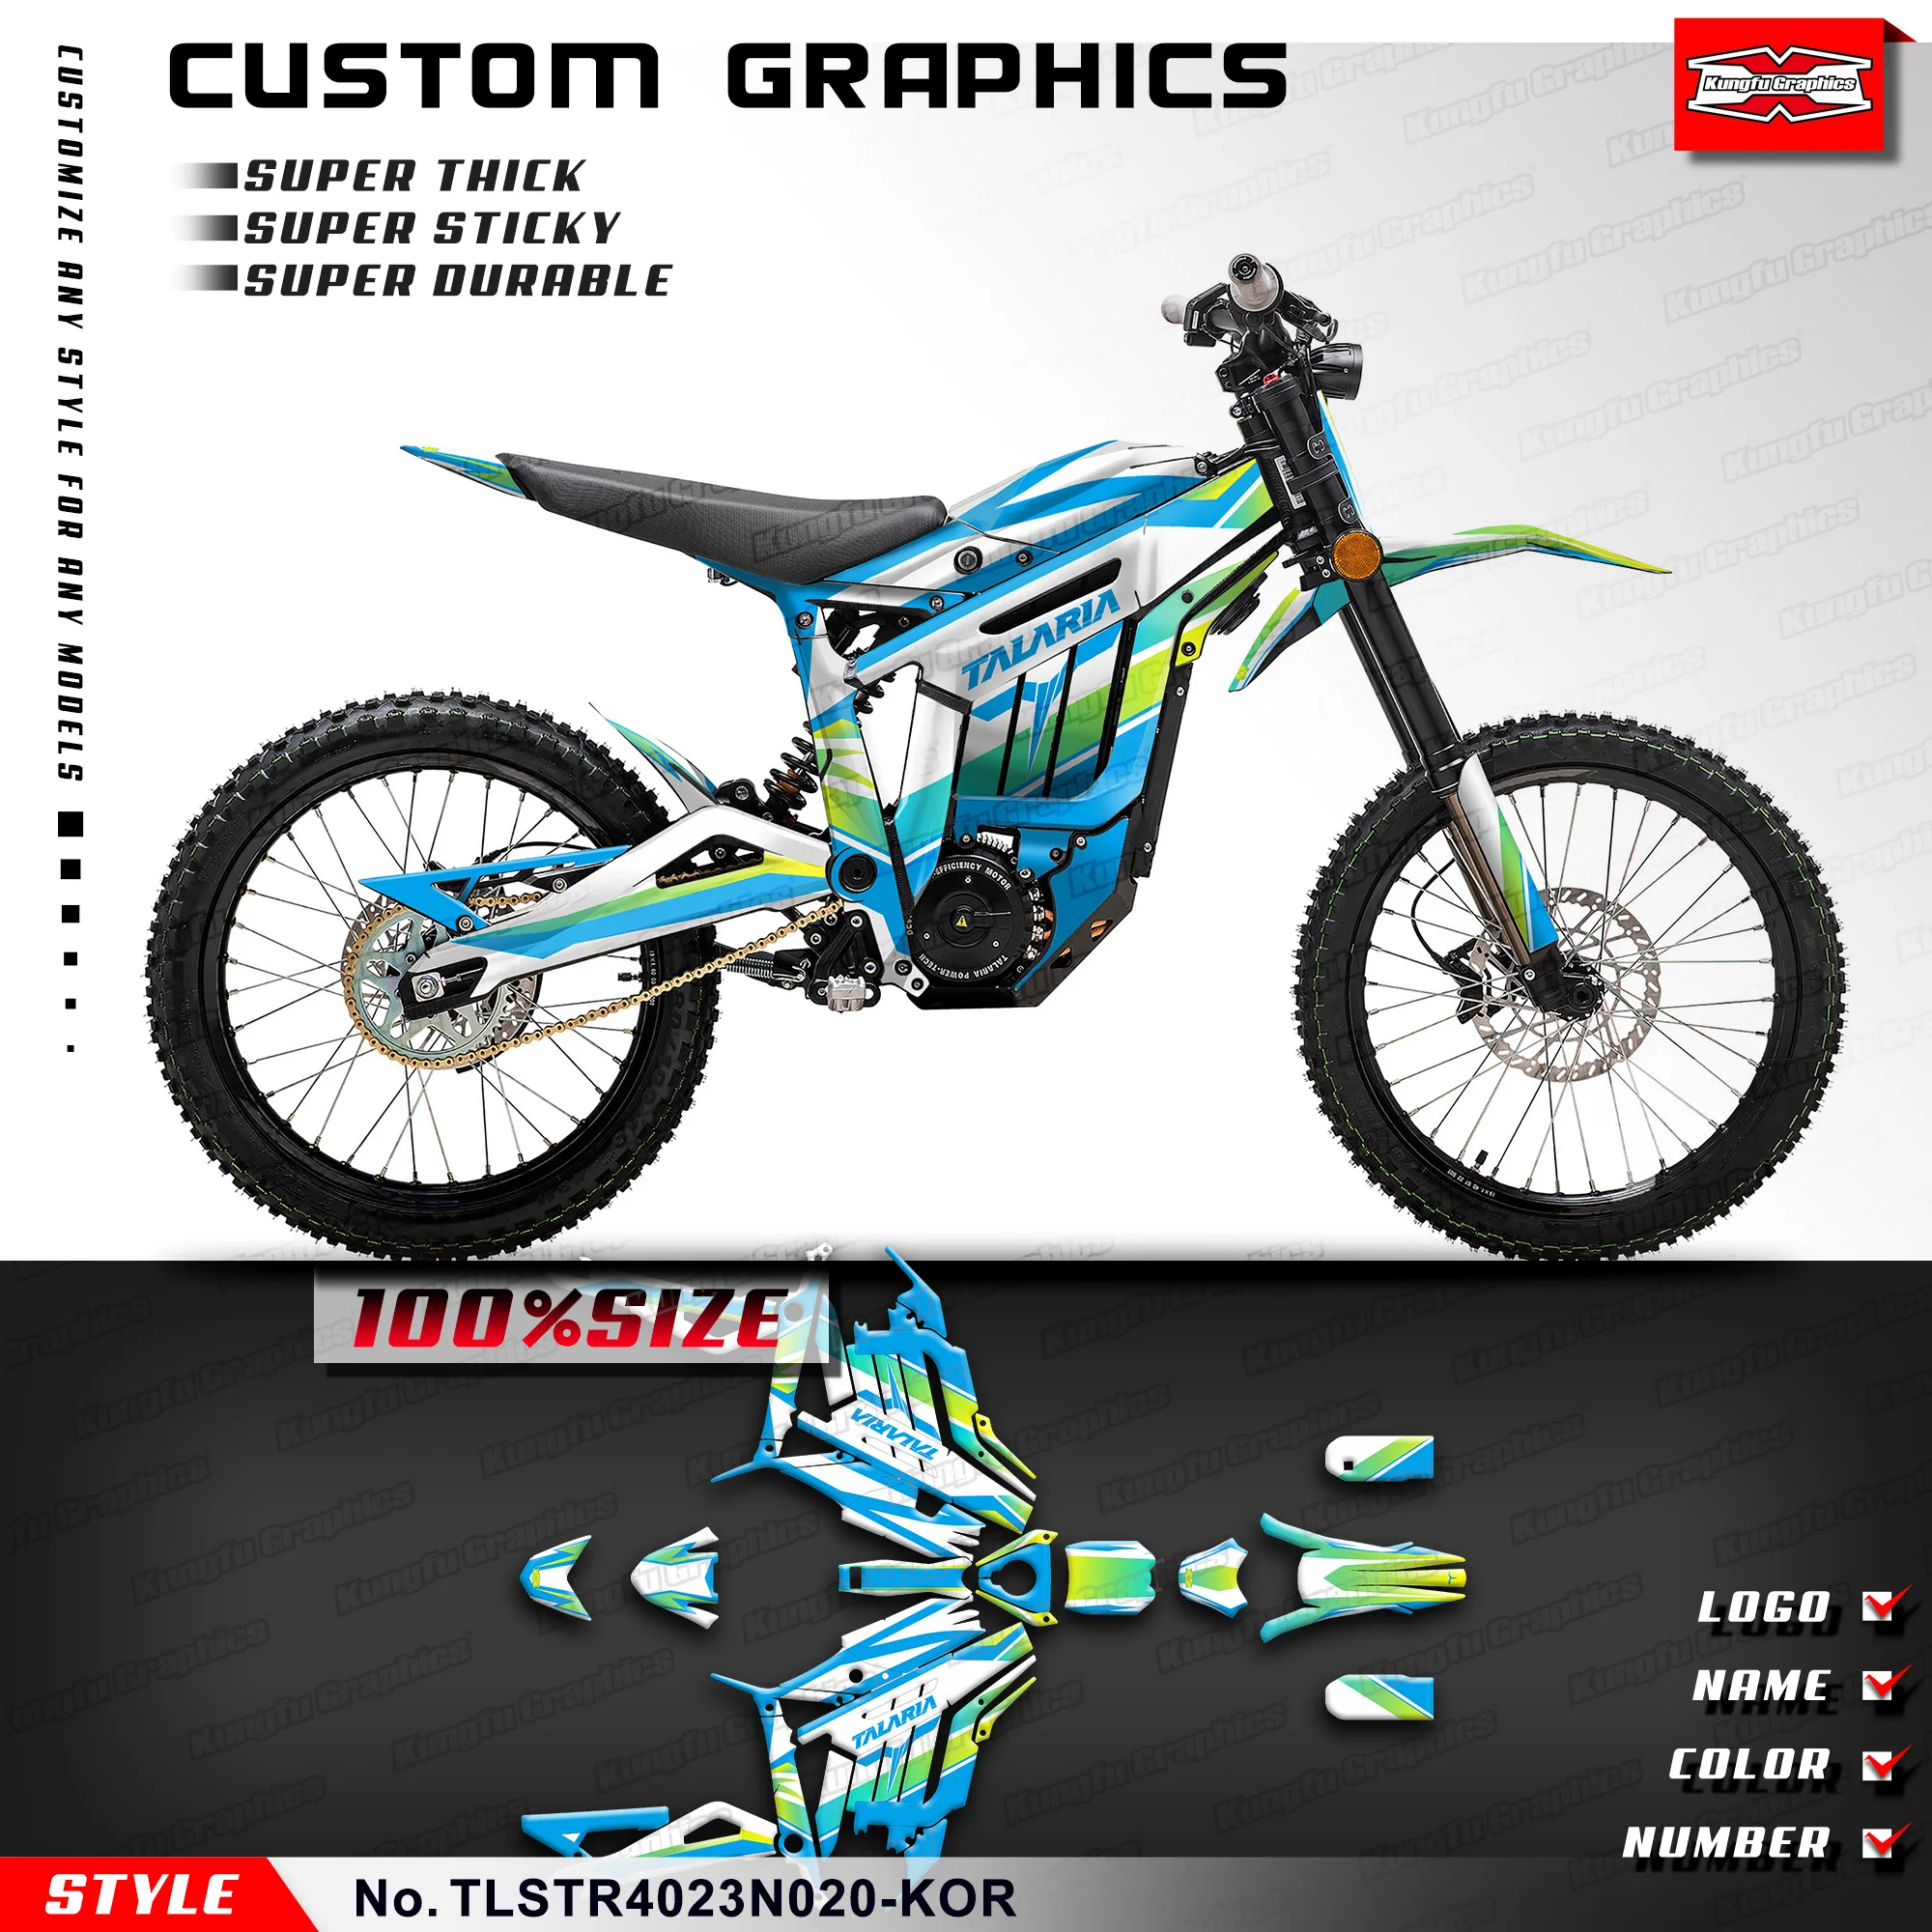 KUNGFU GRAPHICS Restyle Stickers Motocross Decal Kit for TALARIA Sting R MX L1E SX3 Dirt eBike sting duets cd